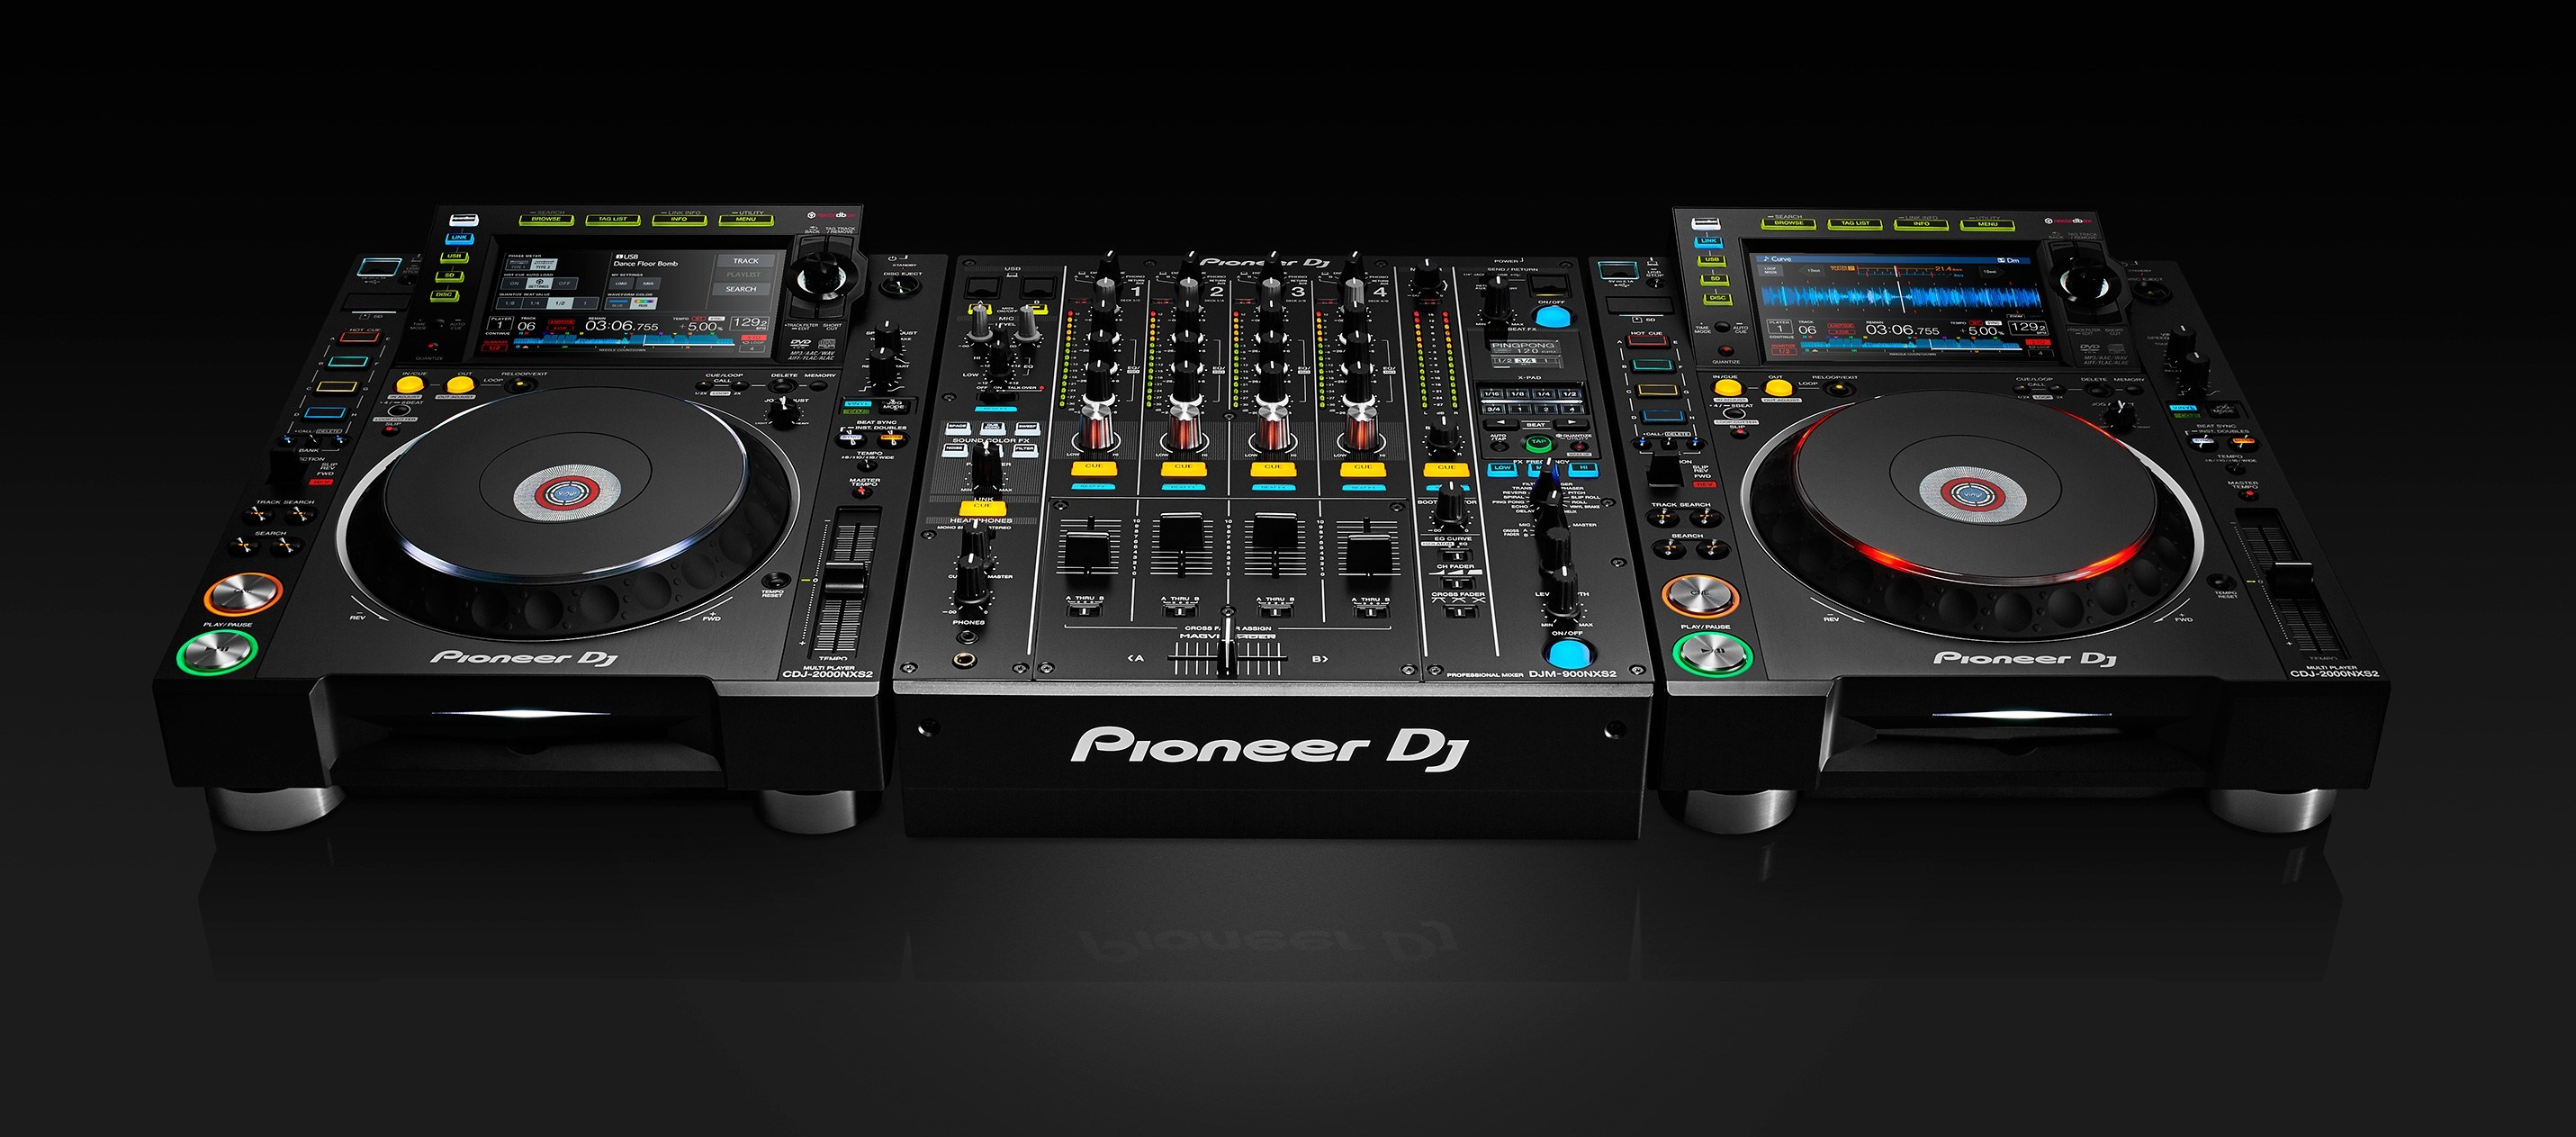 Is Djay Pro Compatible With Pioneer Dj